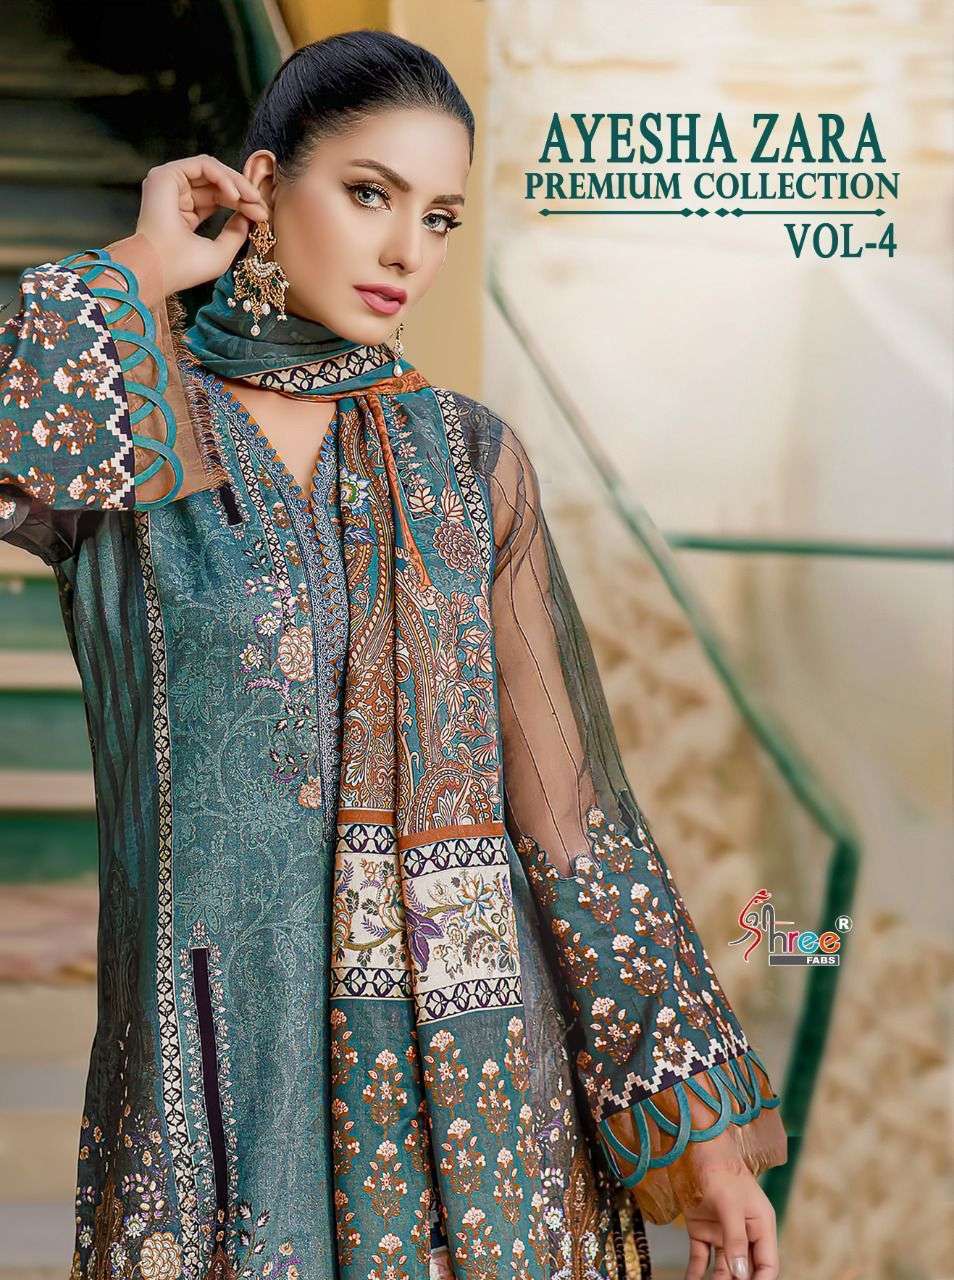 Shree fabs ayesha zara premium collection vol 4 printed pure cotton with embroidery patch work pakistani dress material at wholesale Rate 